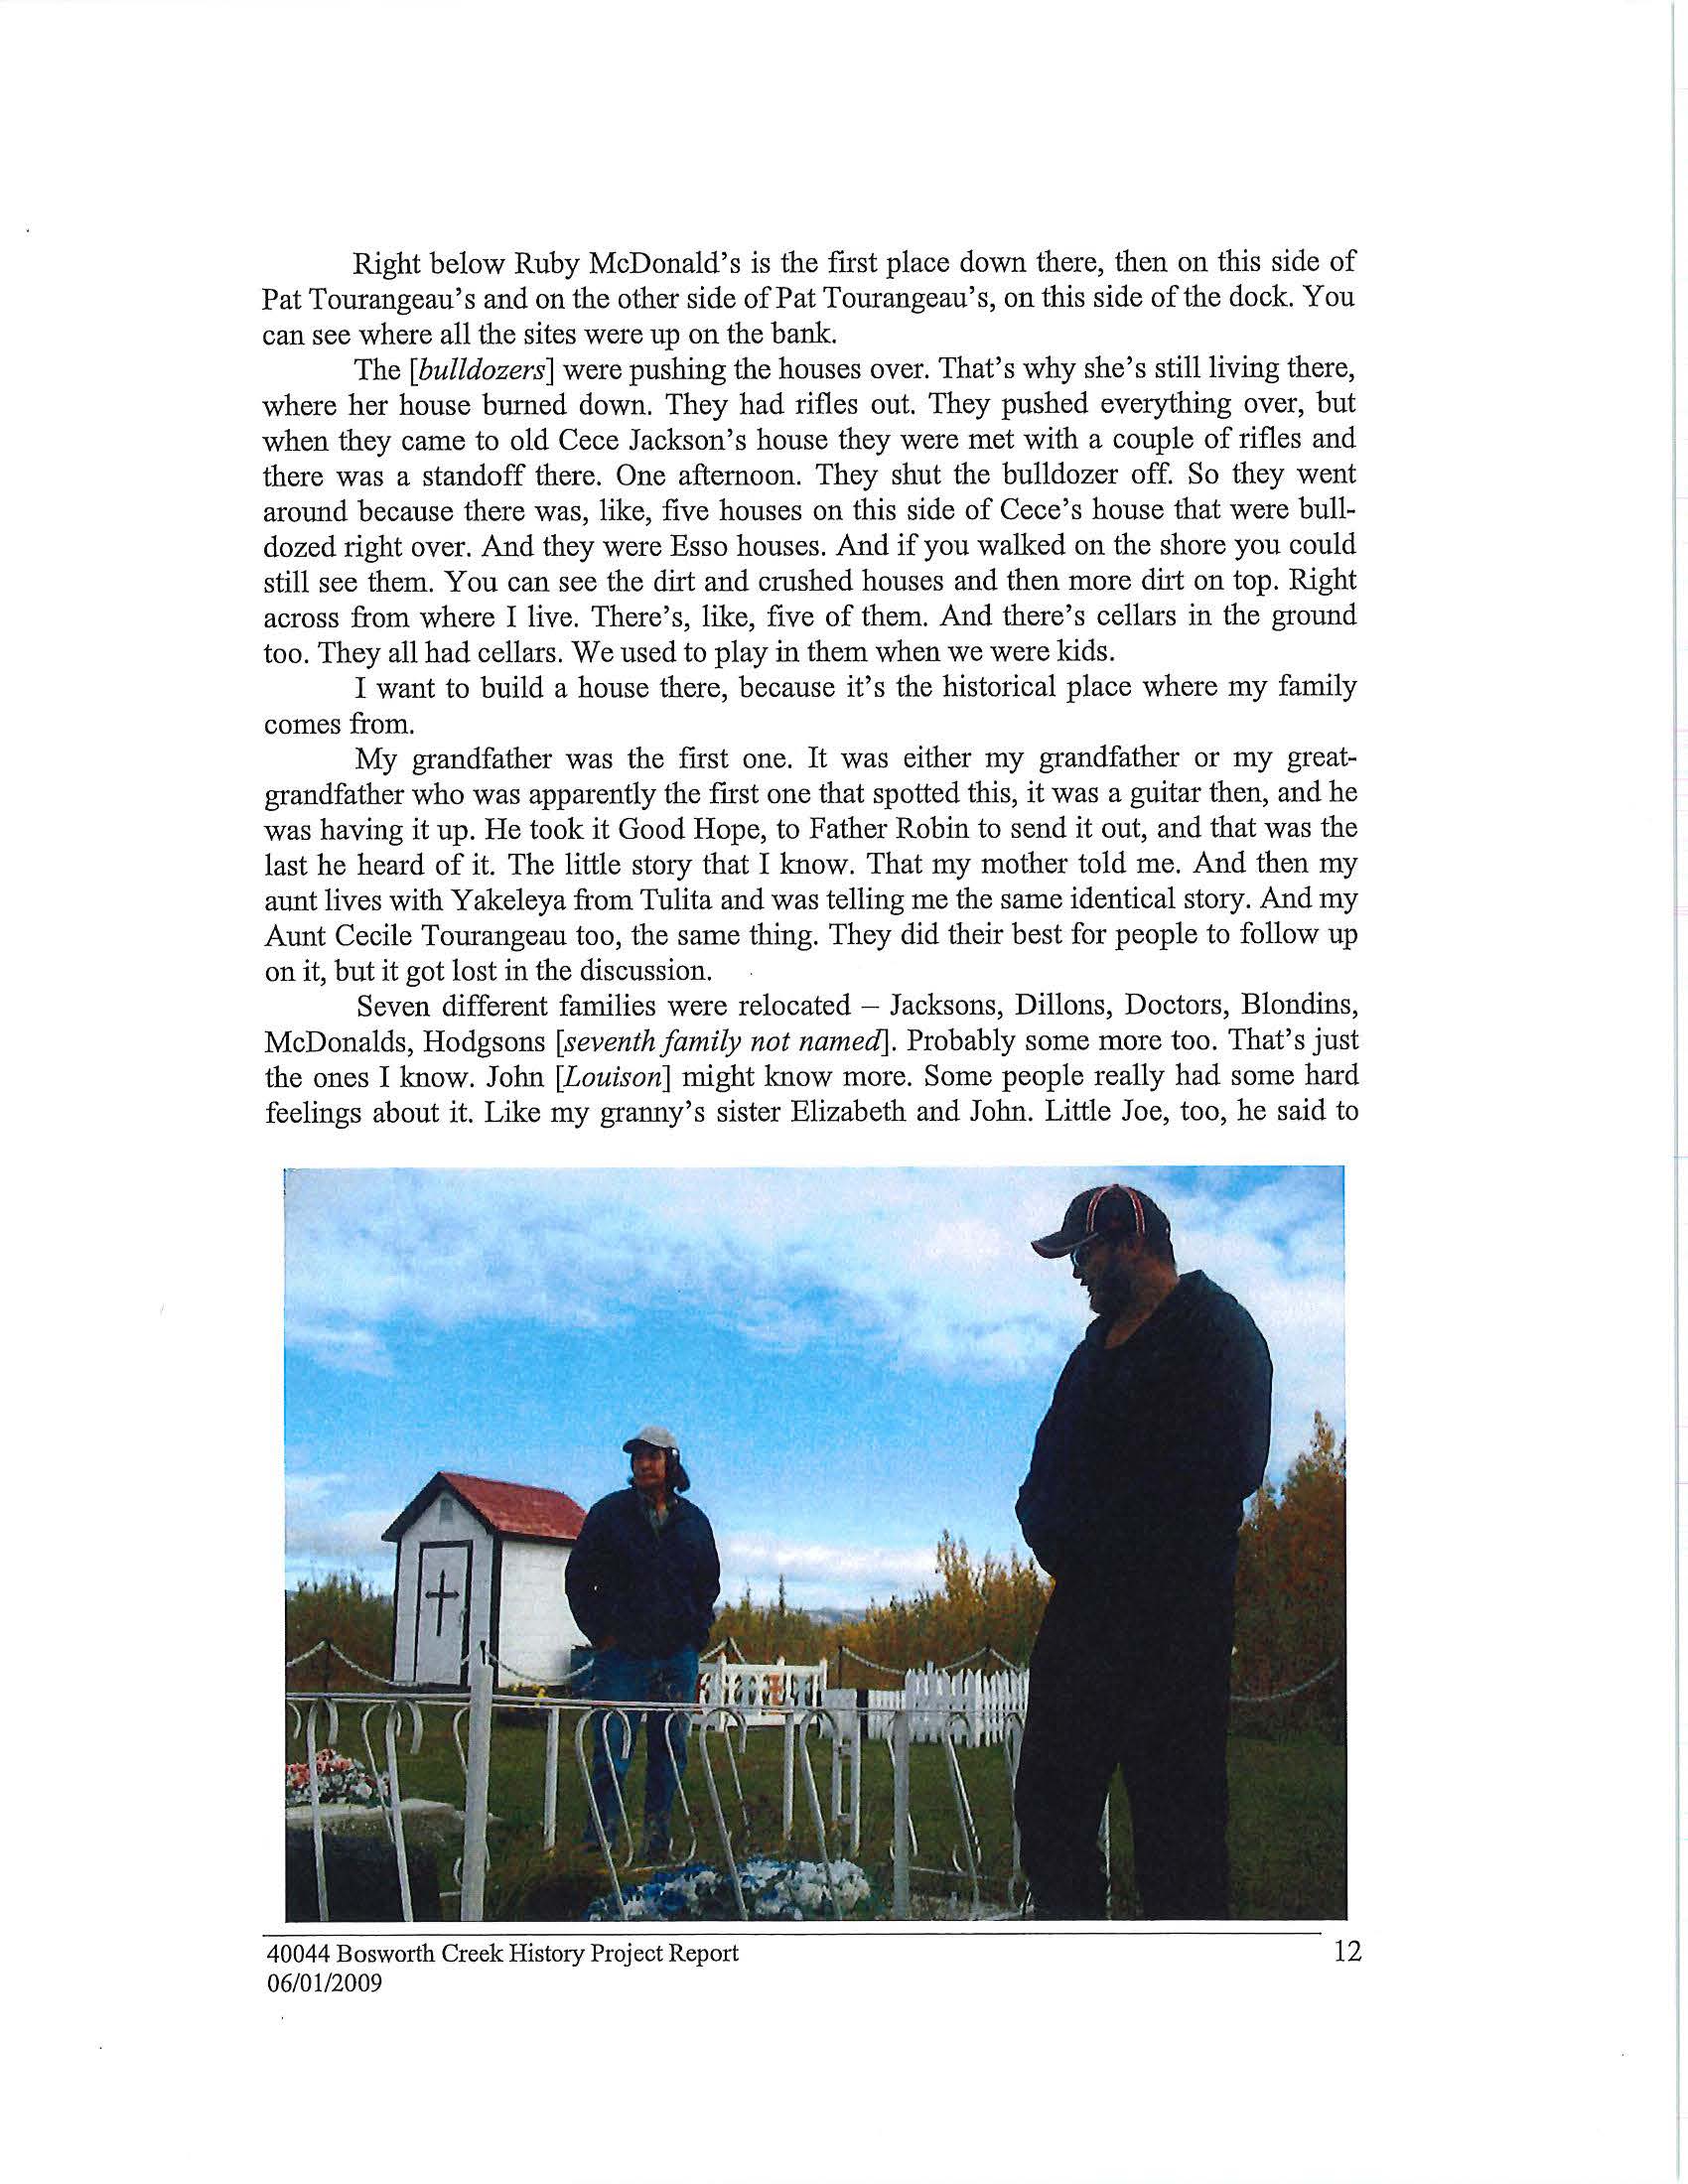 Bosworth Creek History Project Page 17